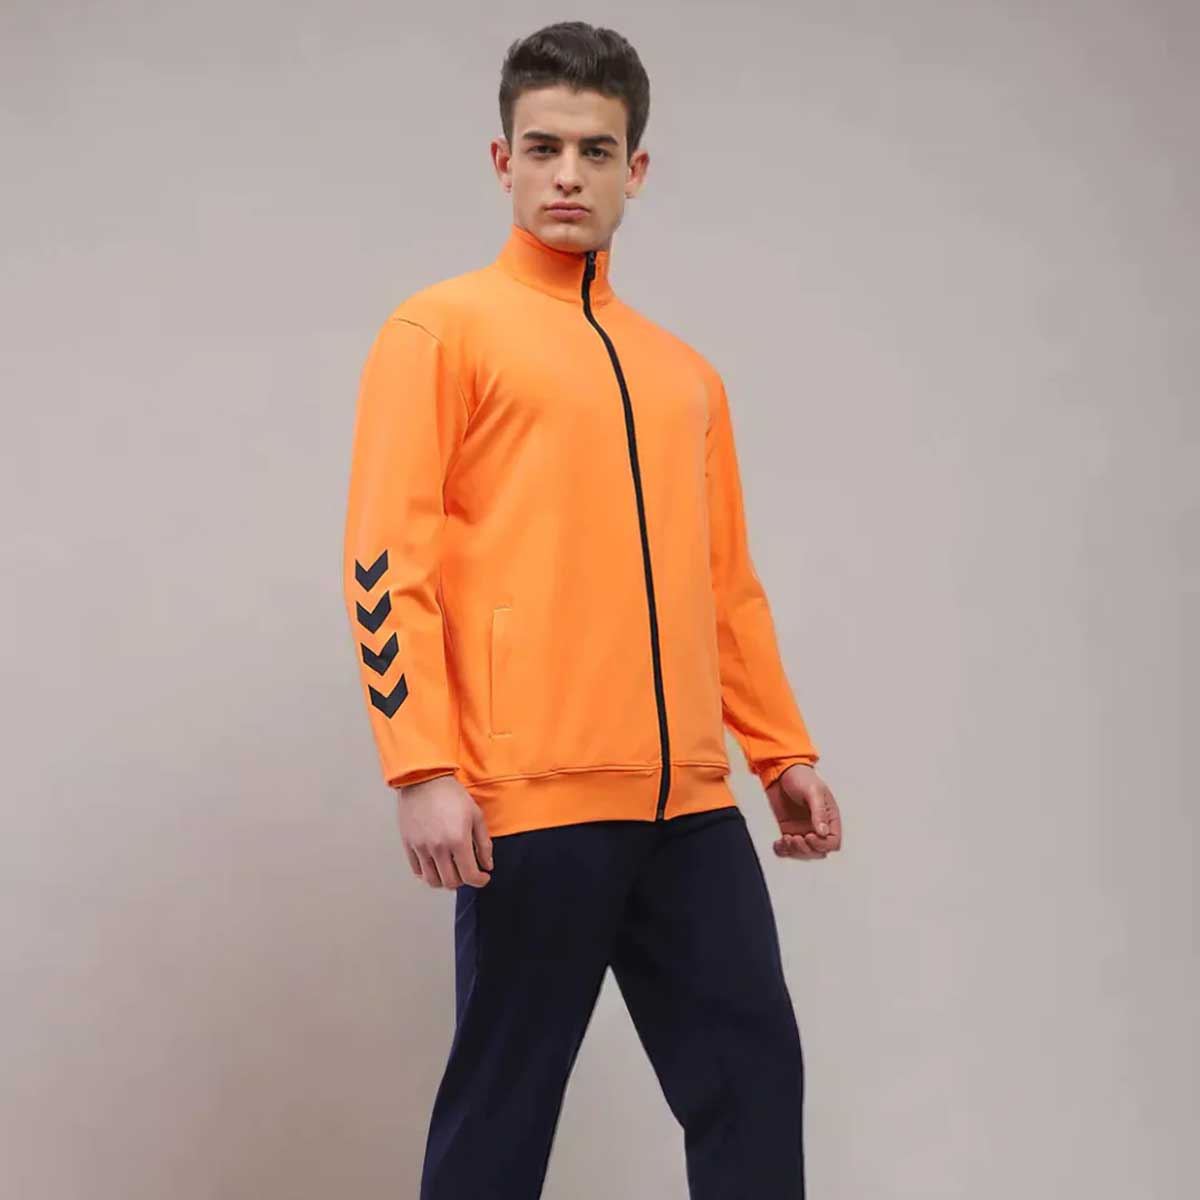 Promotional Tracksuits Manufacturers in Sherbrooke